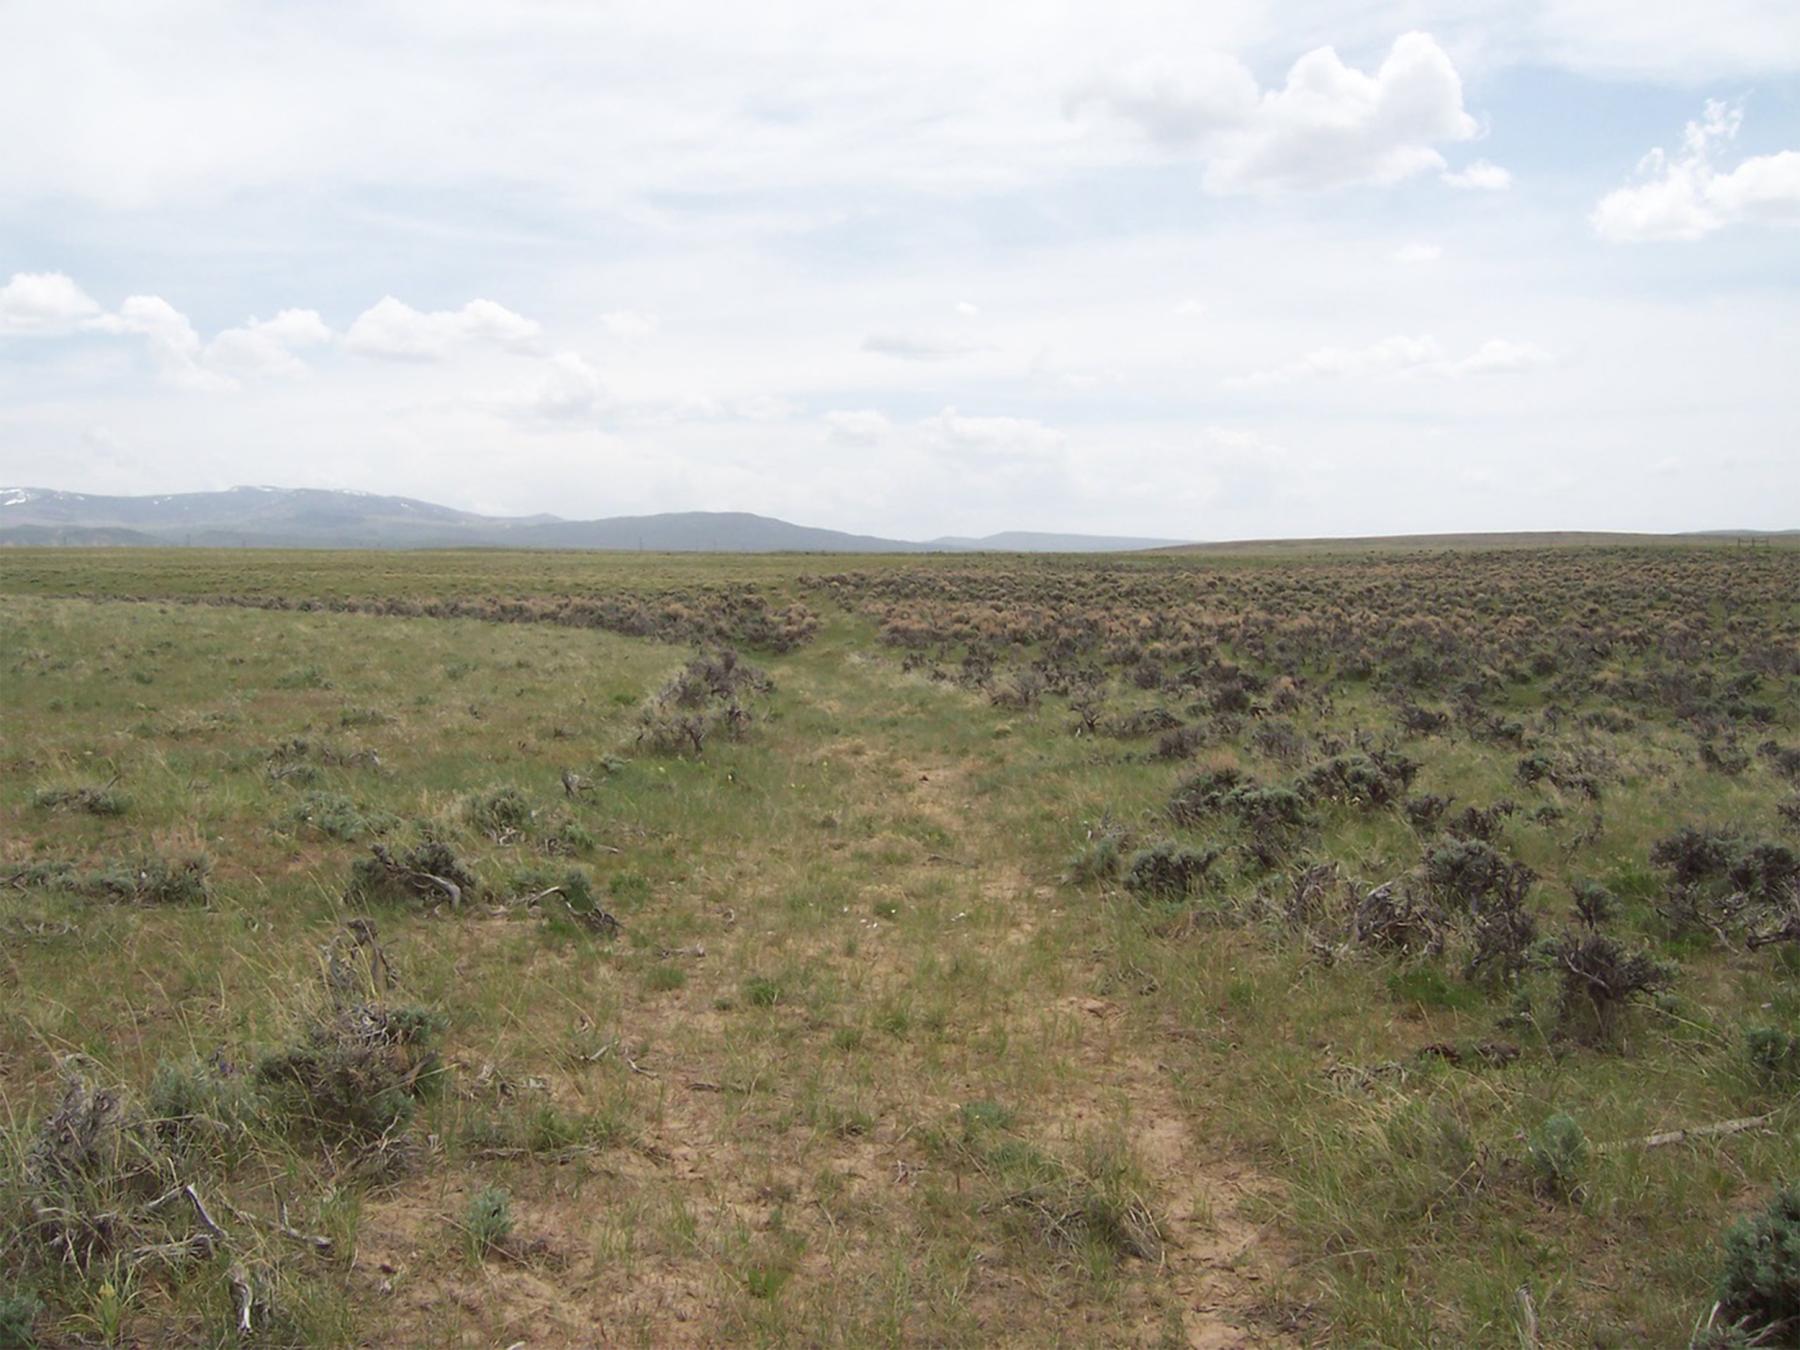 A view of the remnants of the Baggs to Craig Wagon Road in Colorado. The Baggs to Craig road was a continuation of the Rawlins to Baggs Road, ultimately ending at Meeker, Colorado, on the site of the old Ute White River Agency. Western Archaeological Services.